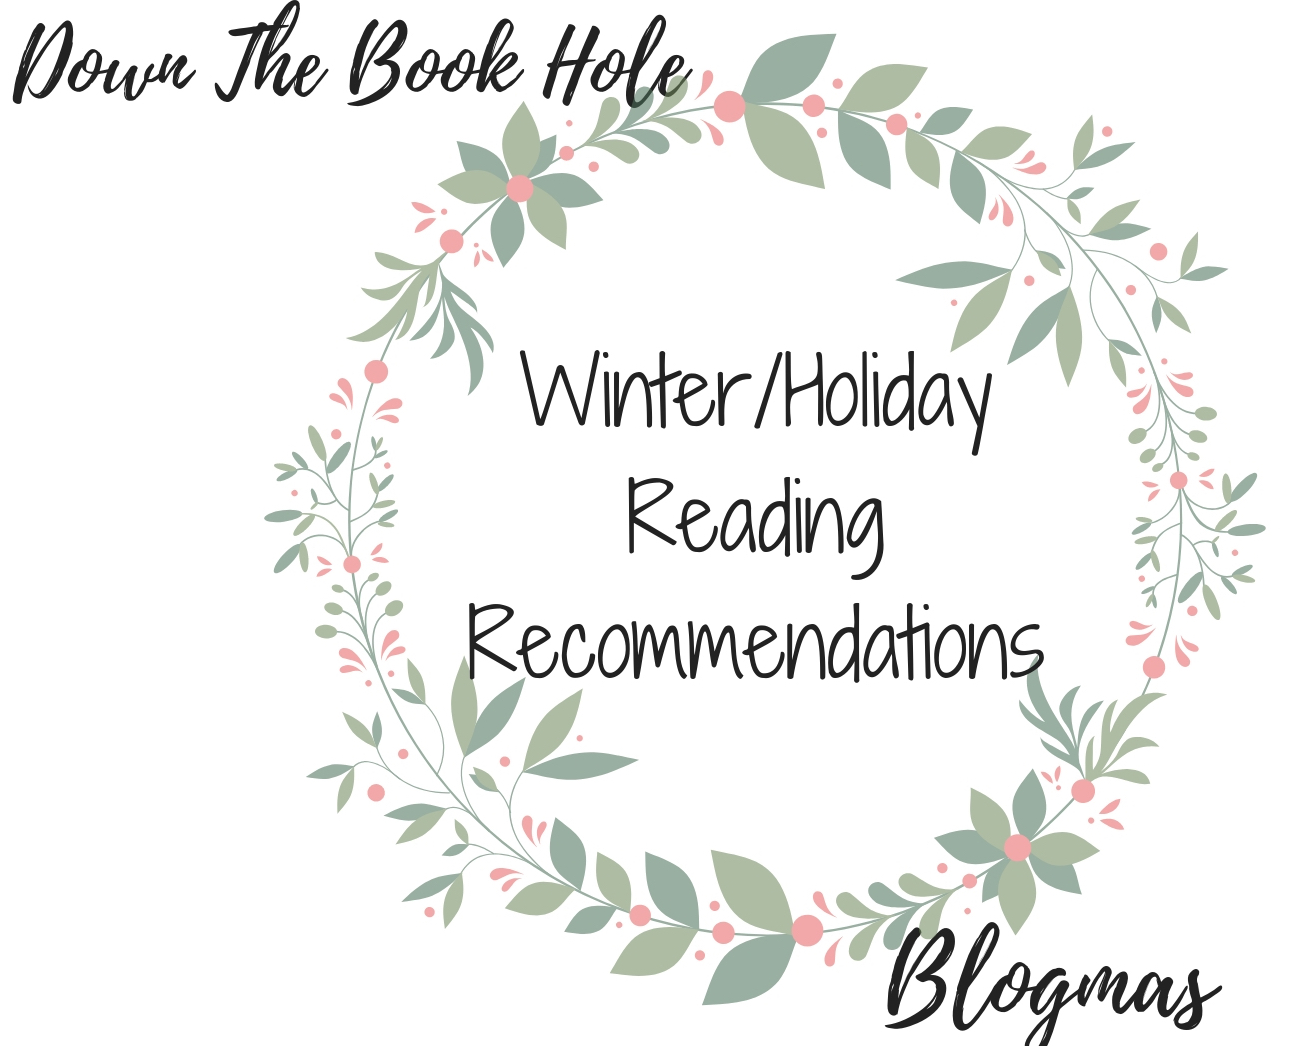 Winter/Holiday Reading Recommendations| Blogmas 2018